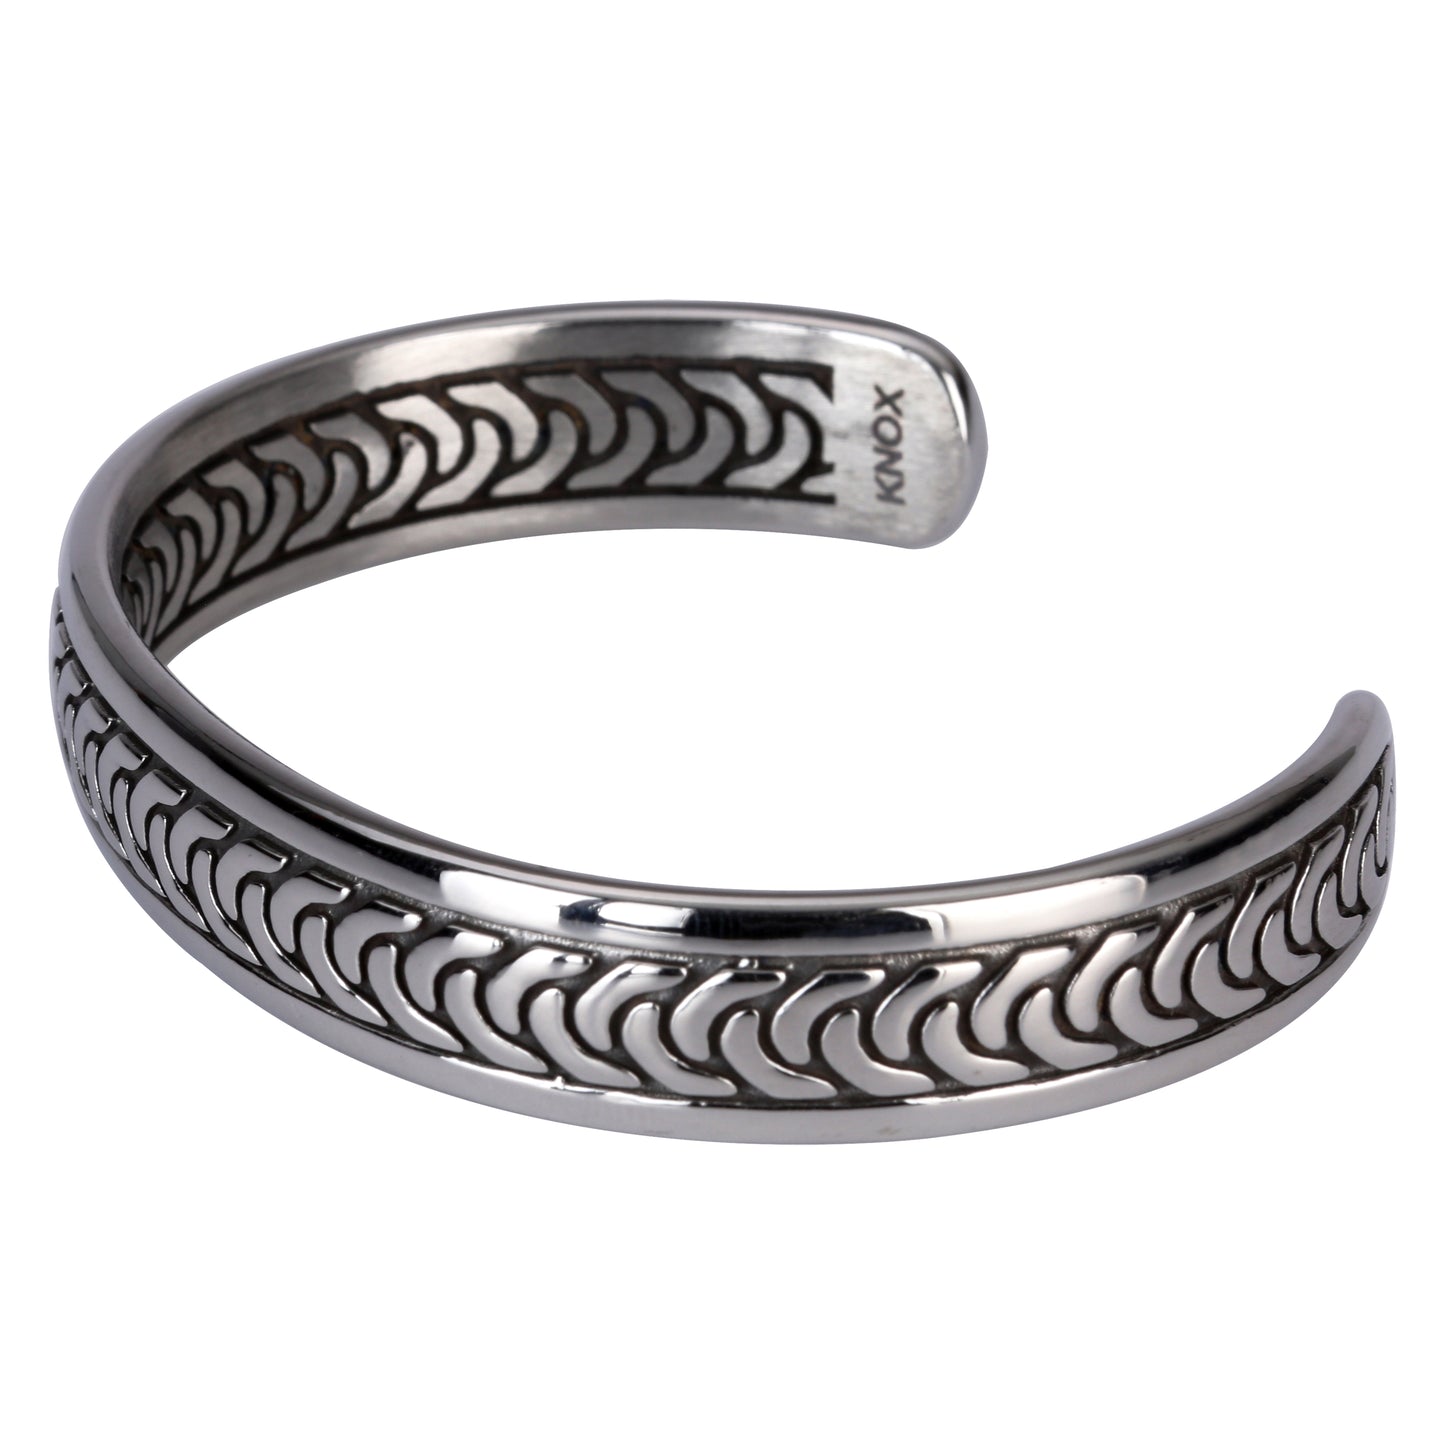 Walk-The-Cup Stainless Steel 316 Bracelet